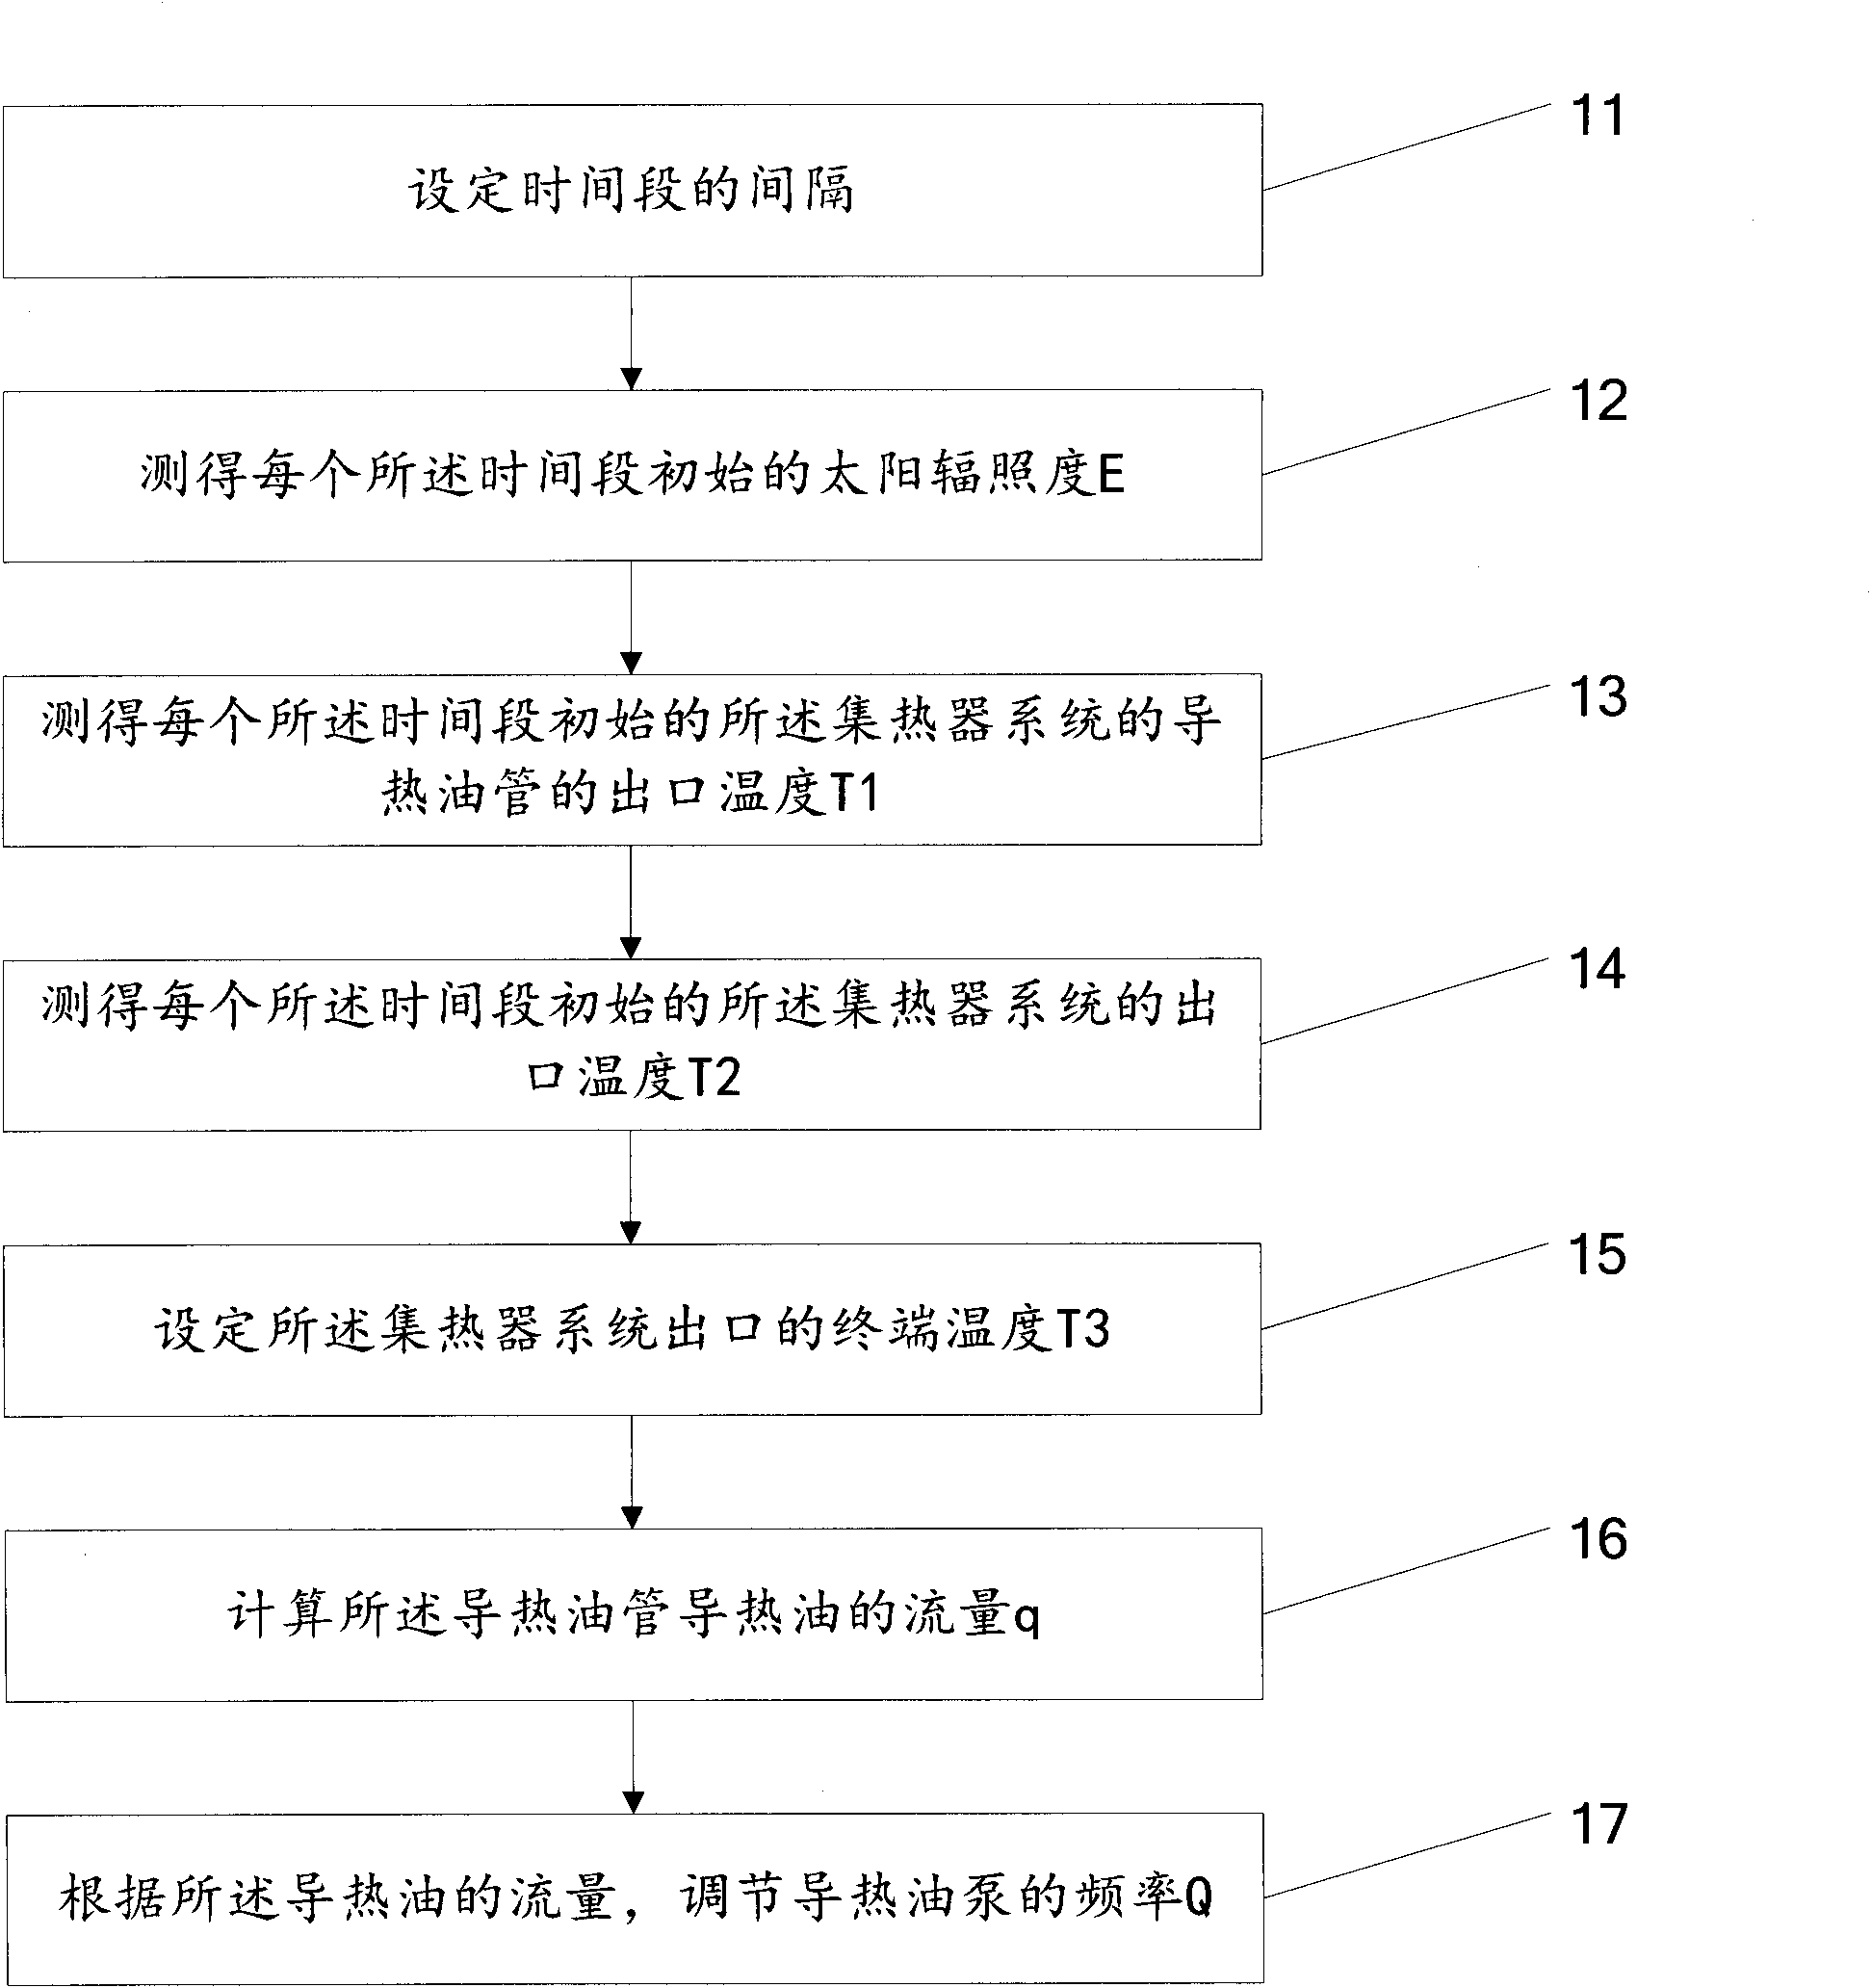 Flow control method for solar heat collector system